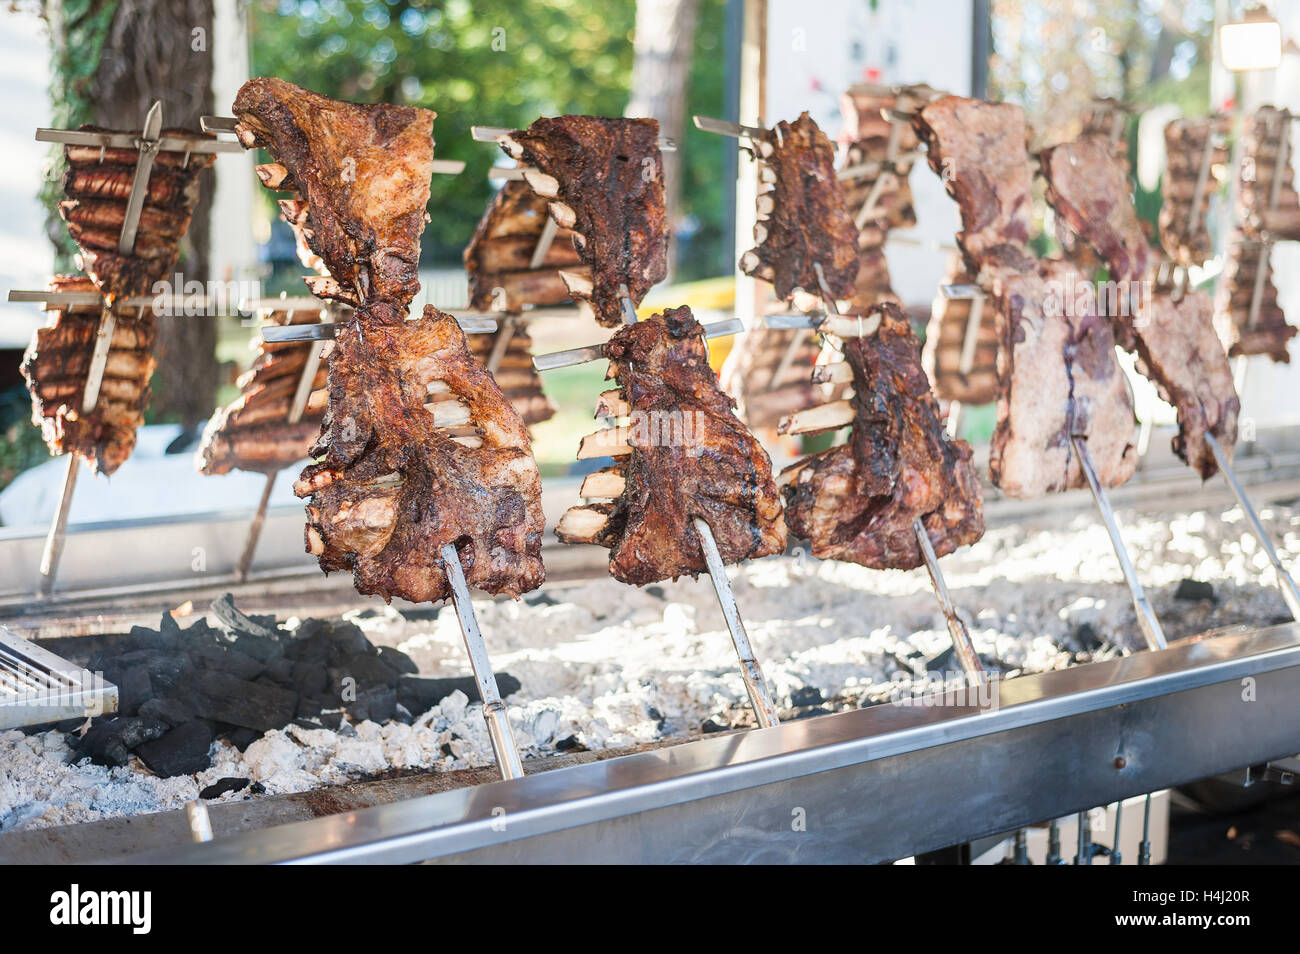 Asado, traditional barbecue dish in Argentina, roasted meat of beef cooked on a vertical grills placed around fire Stock Photo